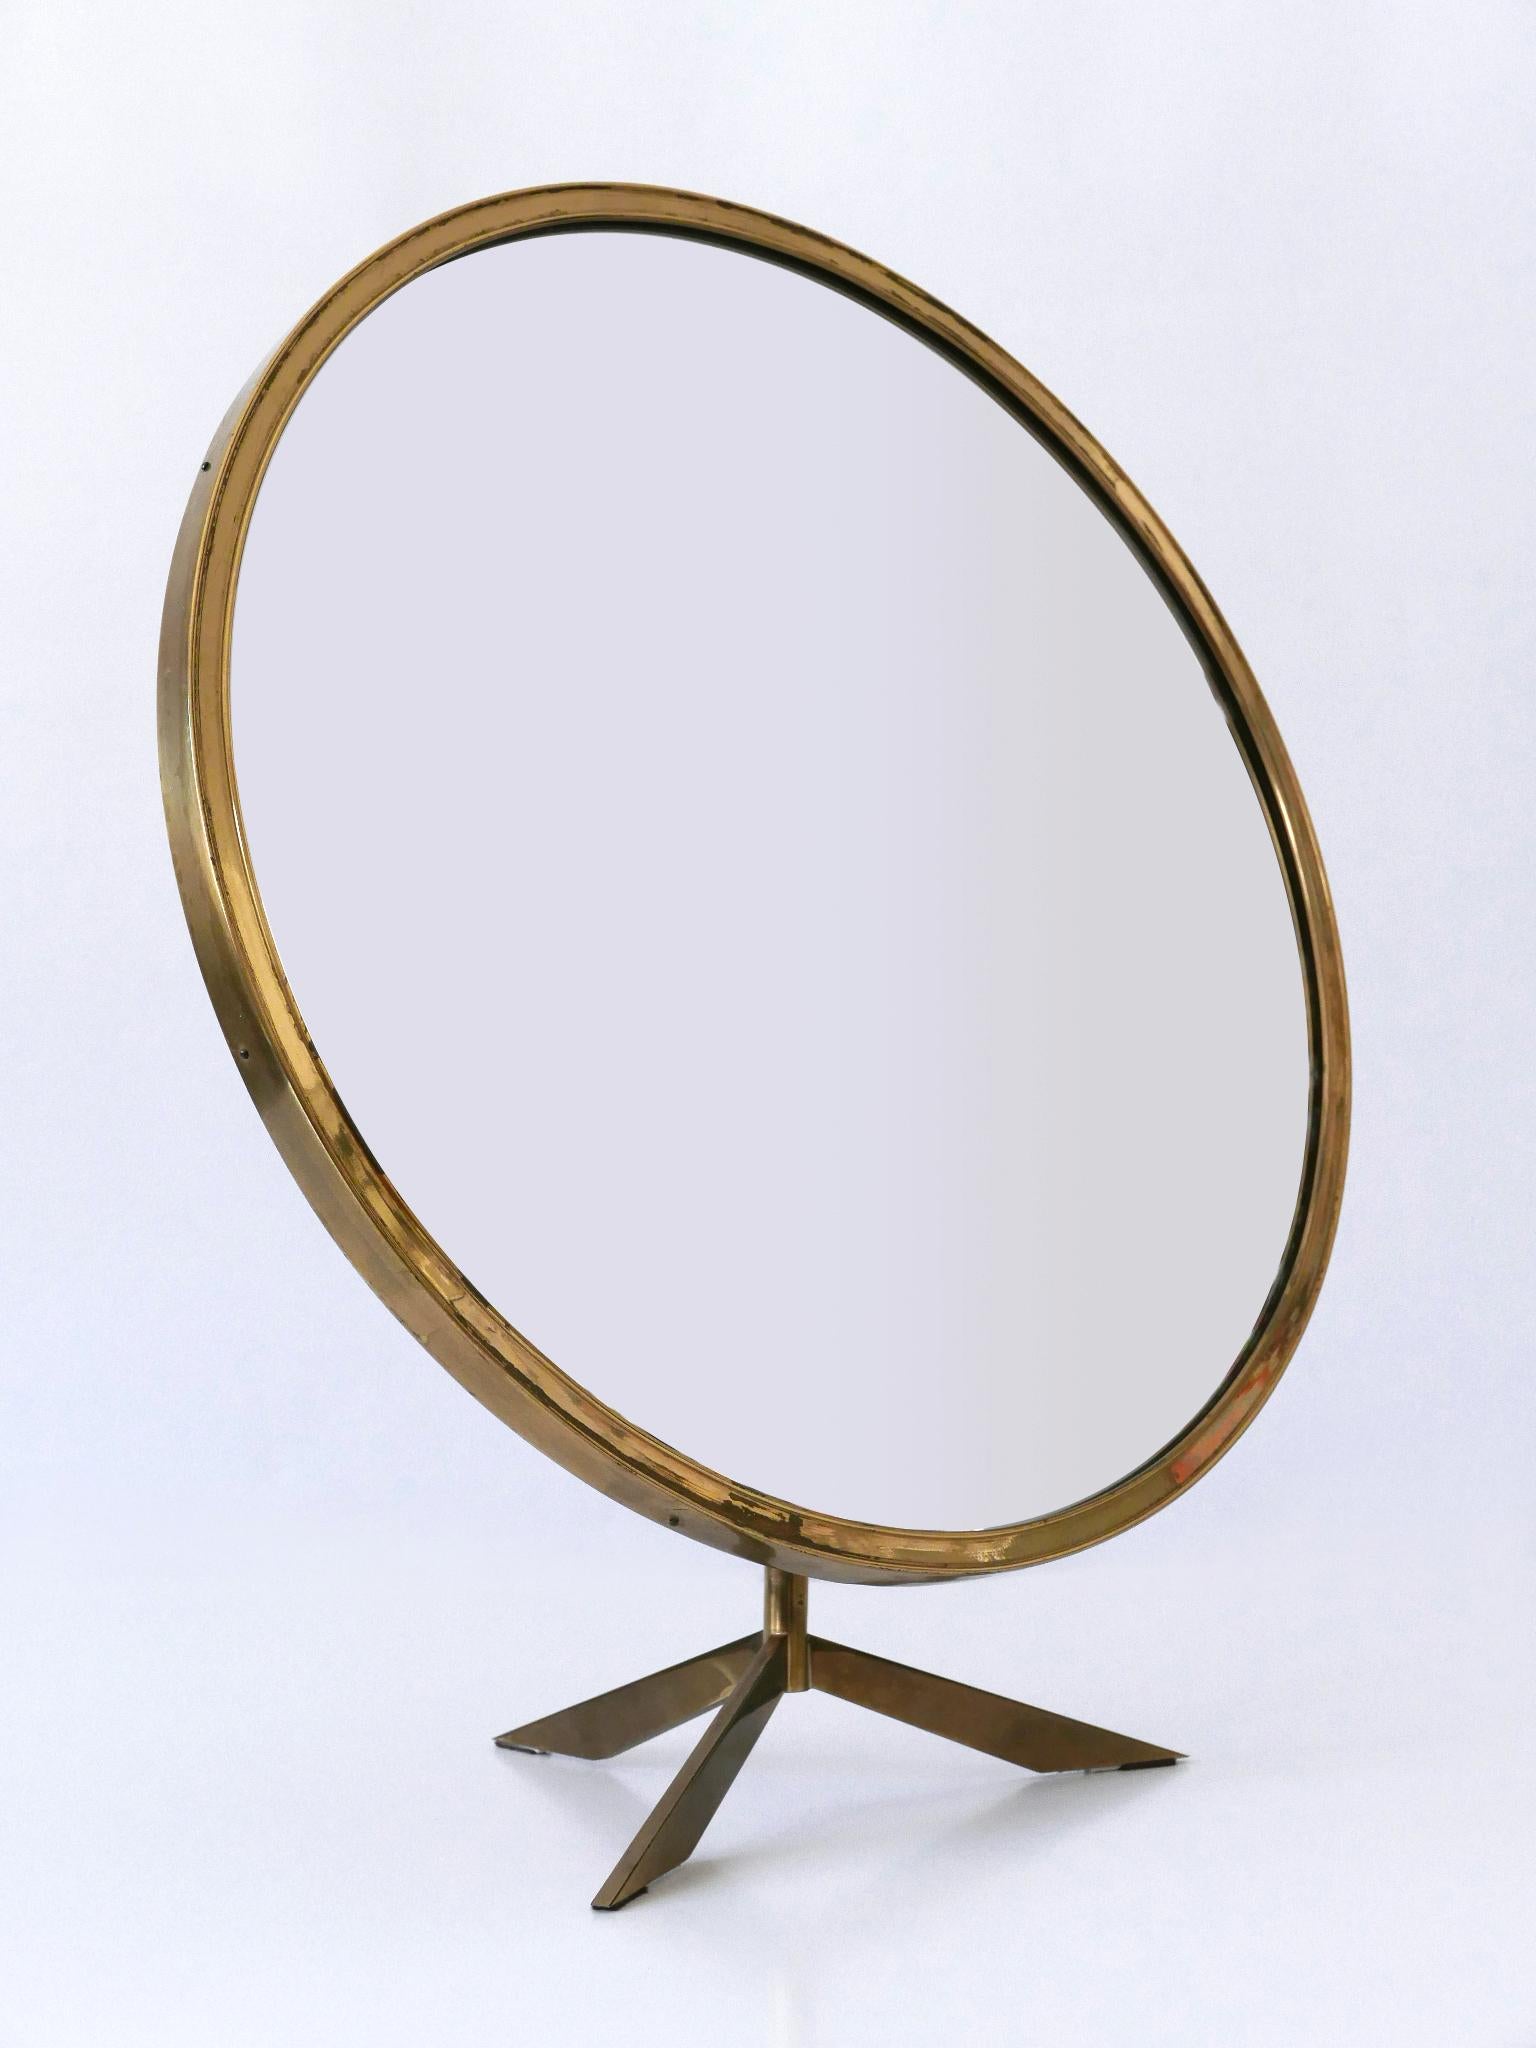 Elegant Mid-Century Modern Wall or Vanity Mirror by Zierform Germany 1950s In Good Condition For Sale In Munich, DE